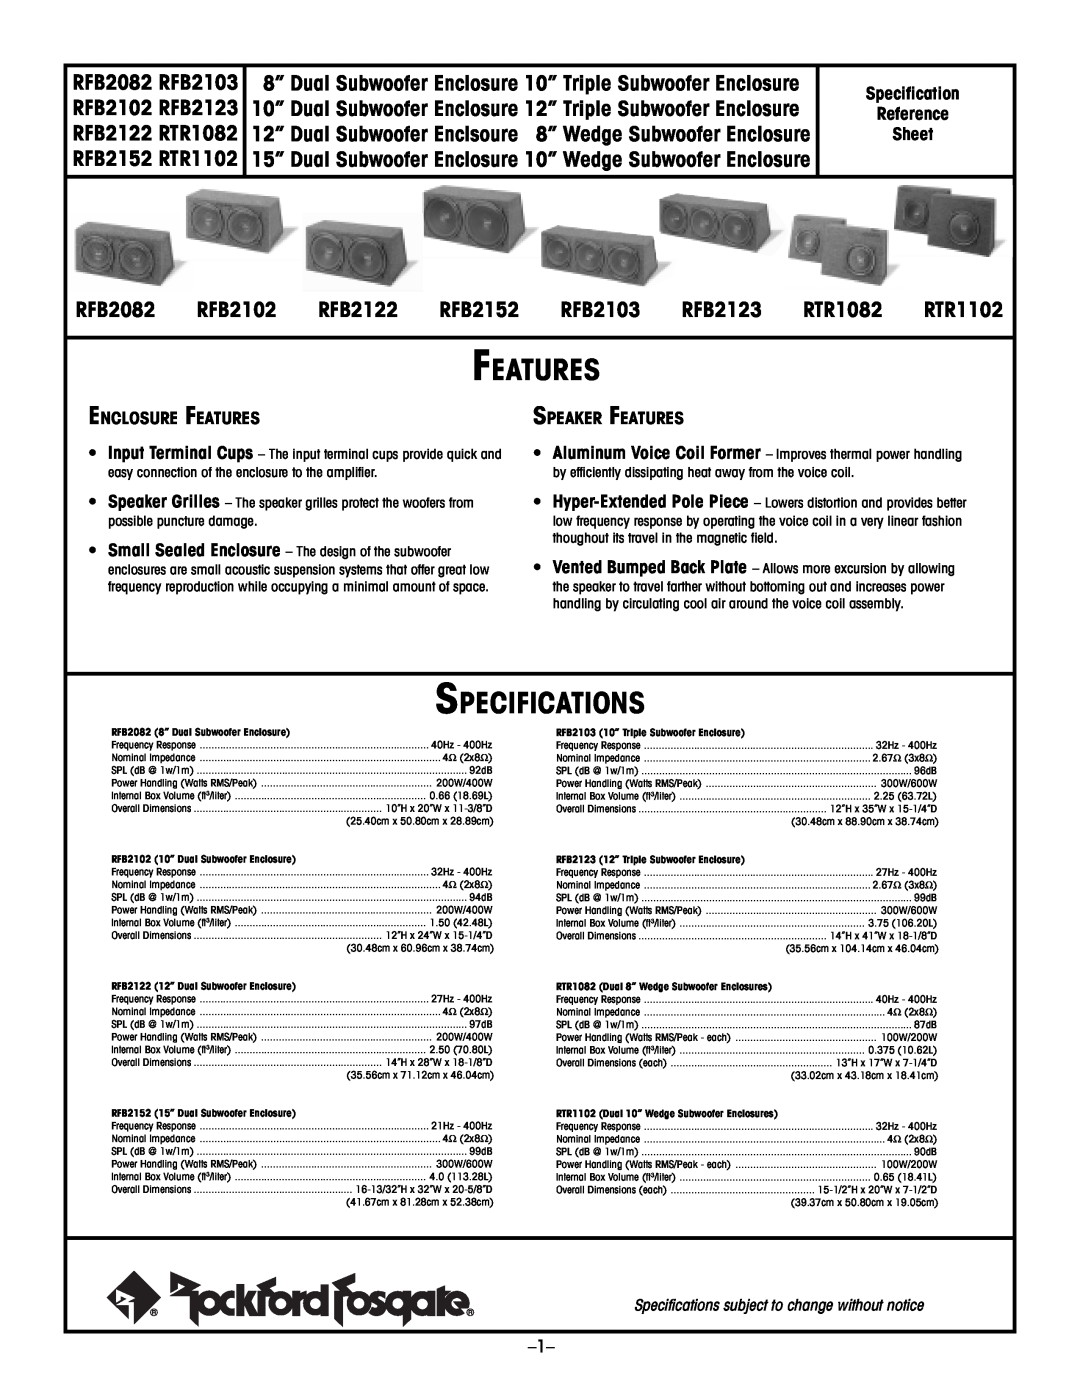 Rockford Fosgate RFB2122 Specifications, Specification Reference Sheet, Enclosure Features, Speaker Features, RFB2082 